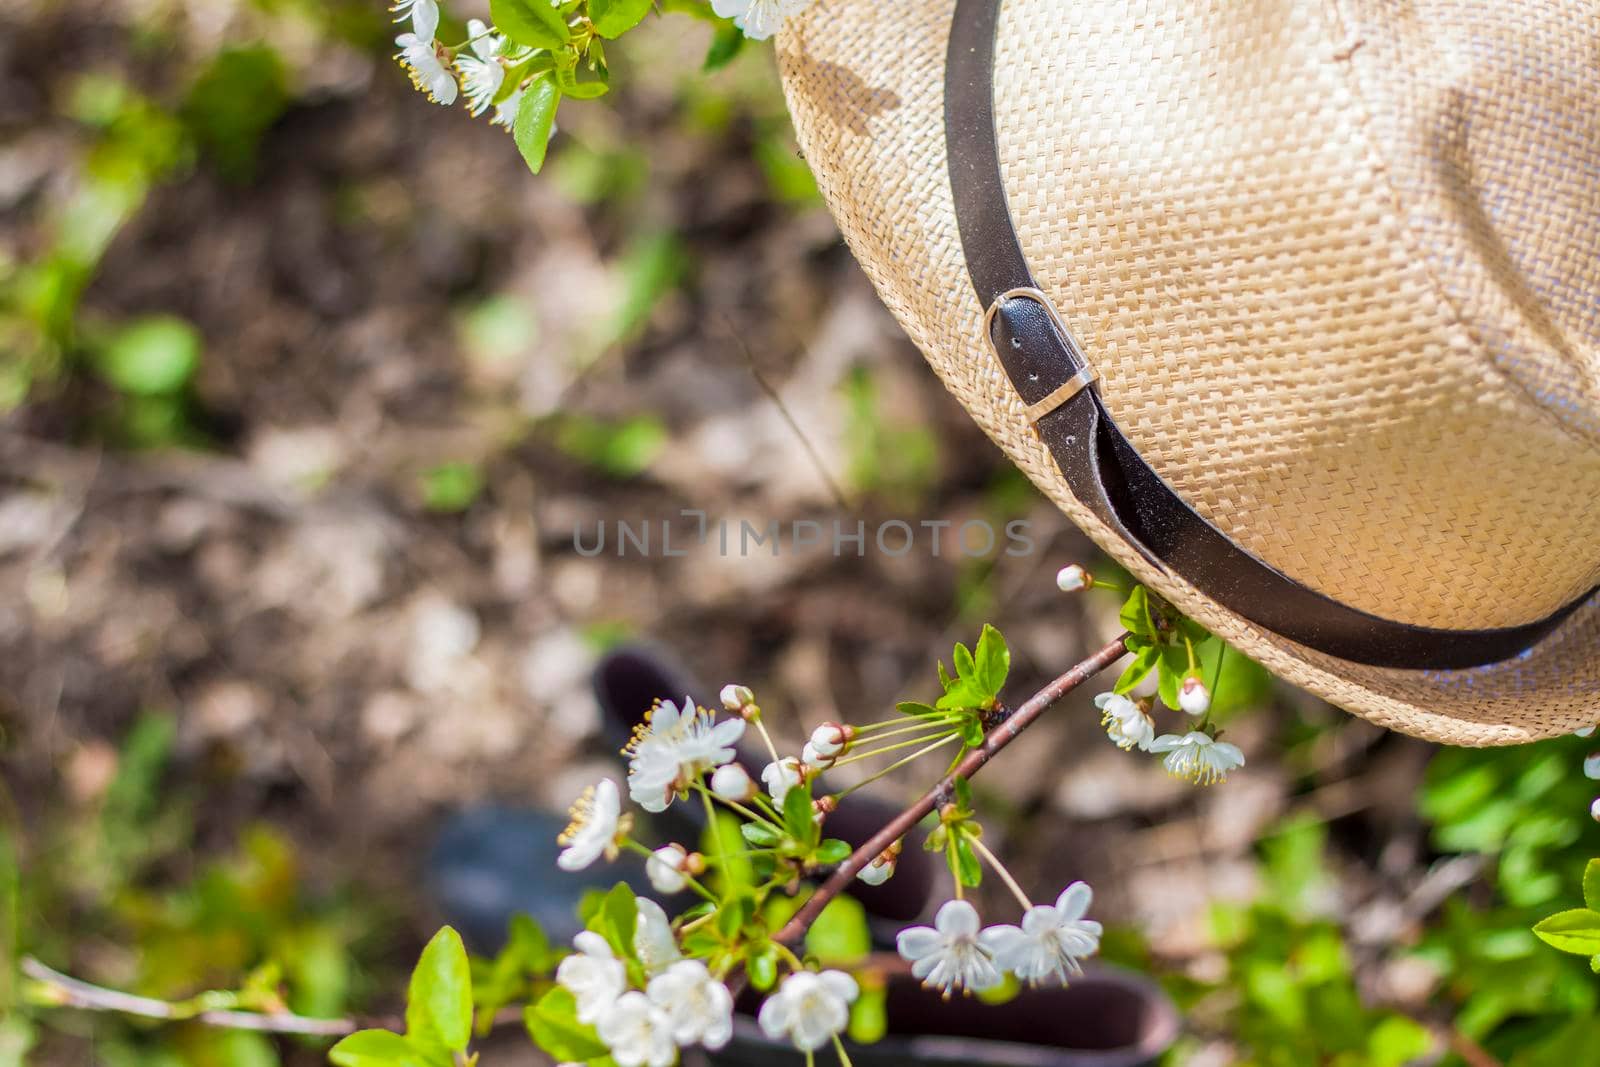 In the garden, on a tree with white cherry blossoms, there is a garden hat, and under it are boots. Gardening and gardening, Active recreation in the country